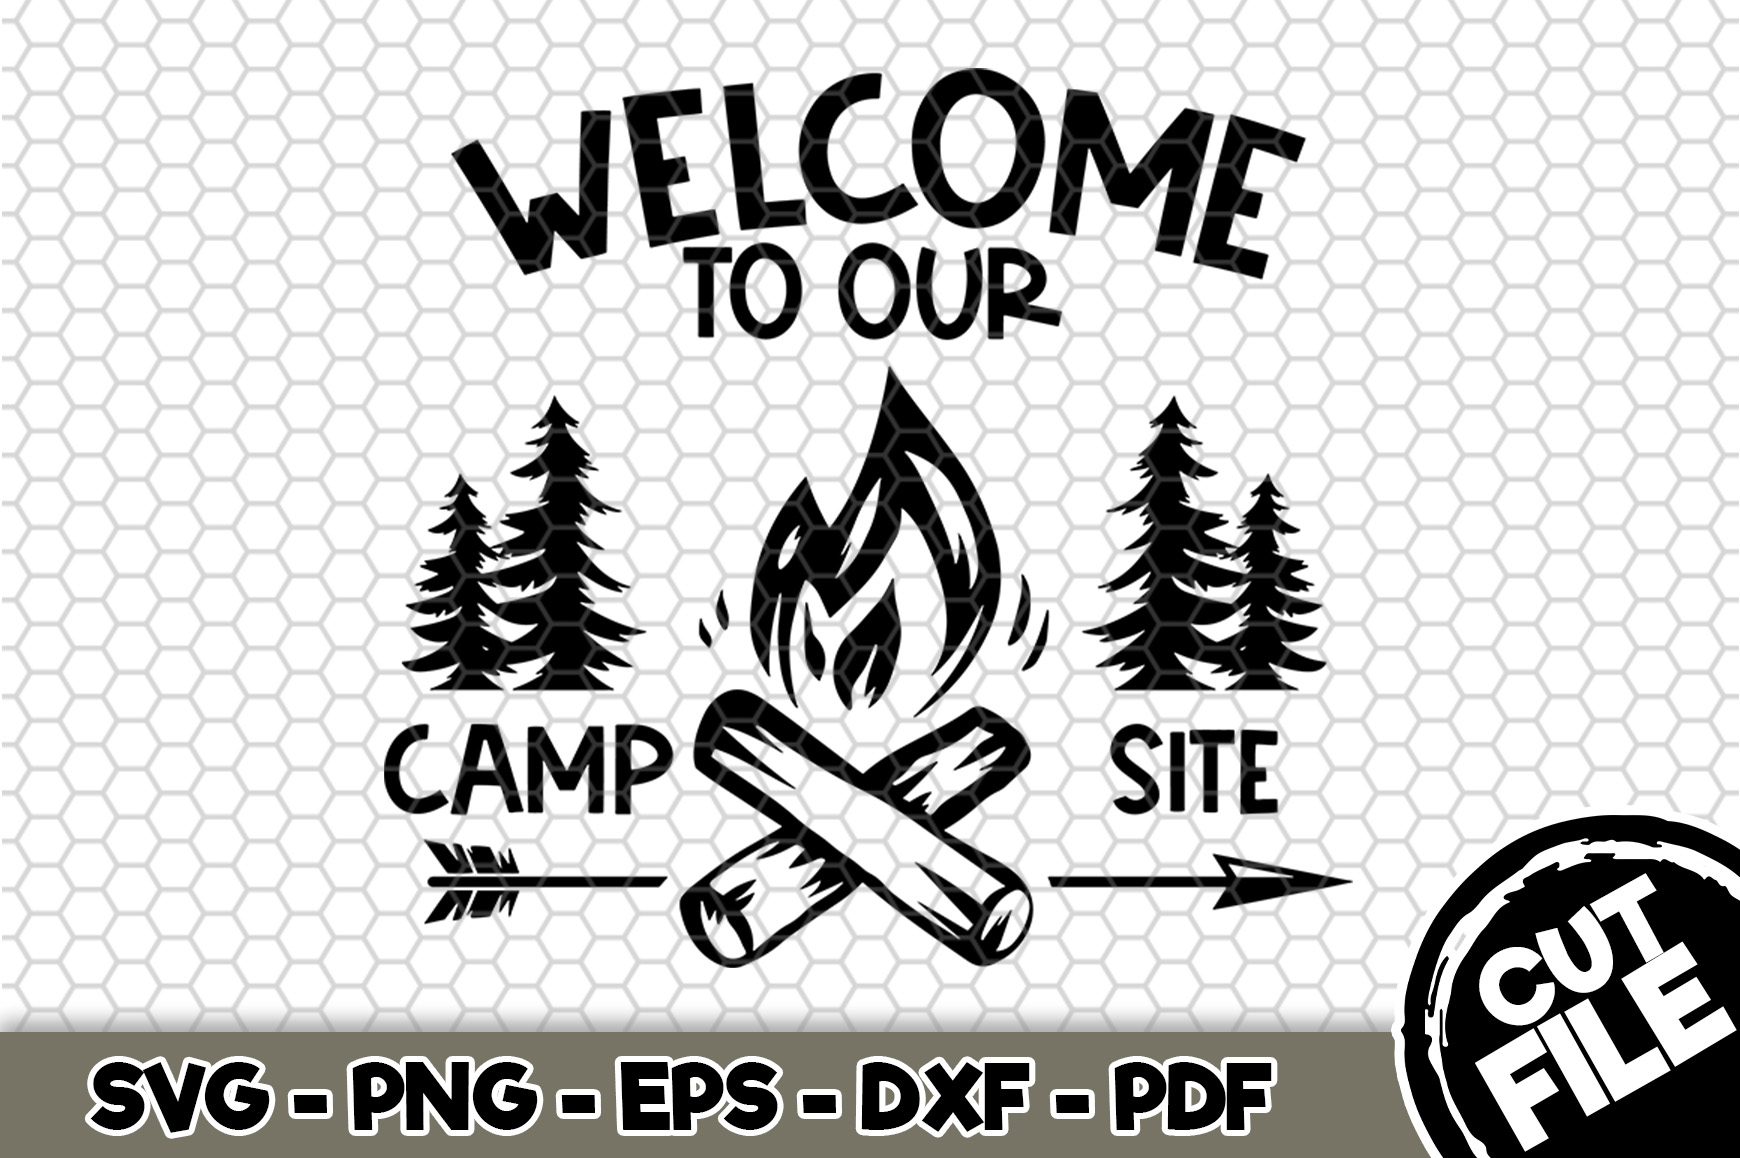 Welcome To Our Camp Site - SVG Cut File n263